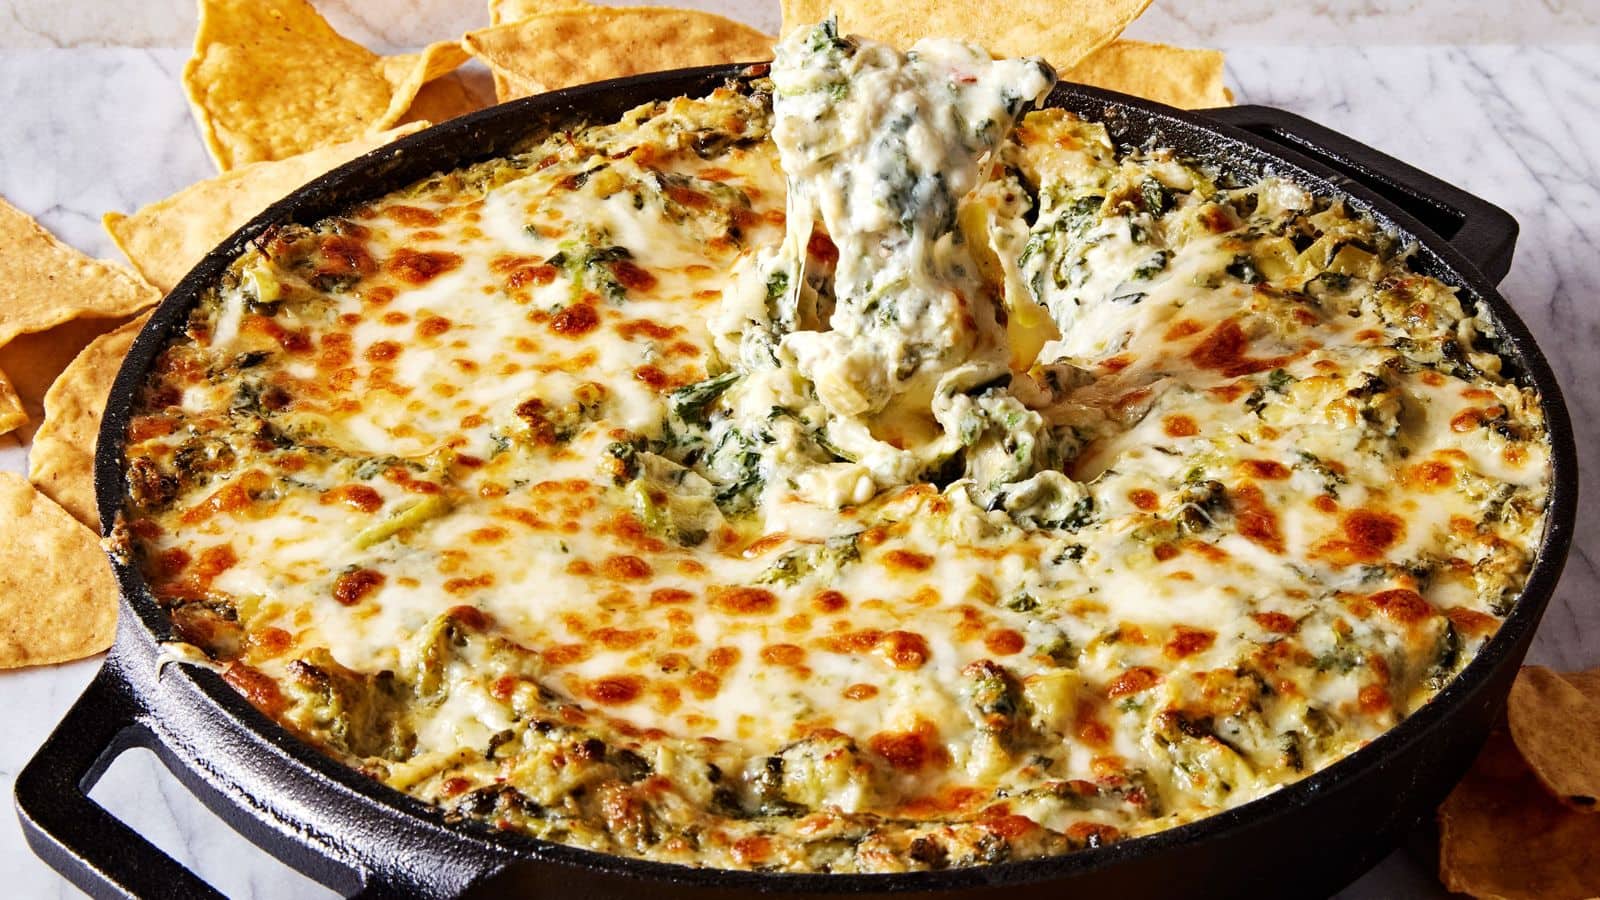 Impress your guests with this decadent spinach artichoke pizza recipe